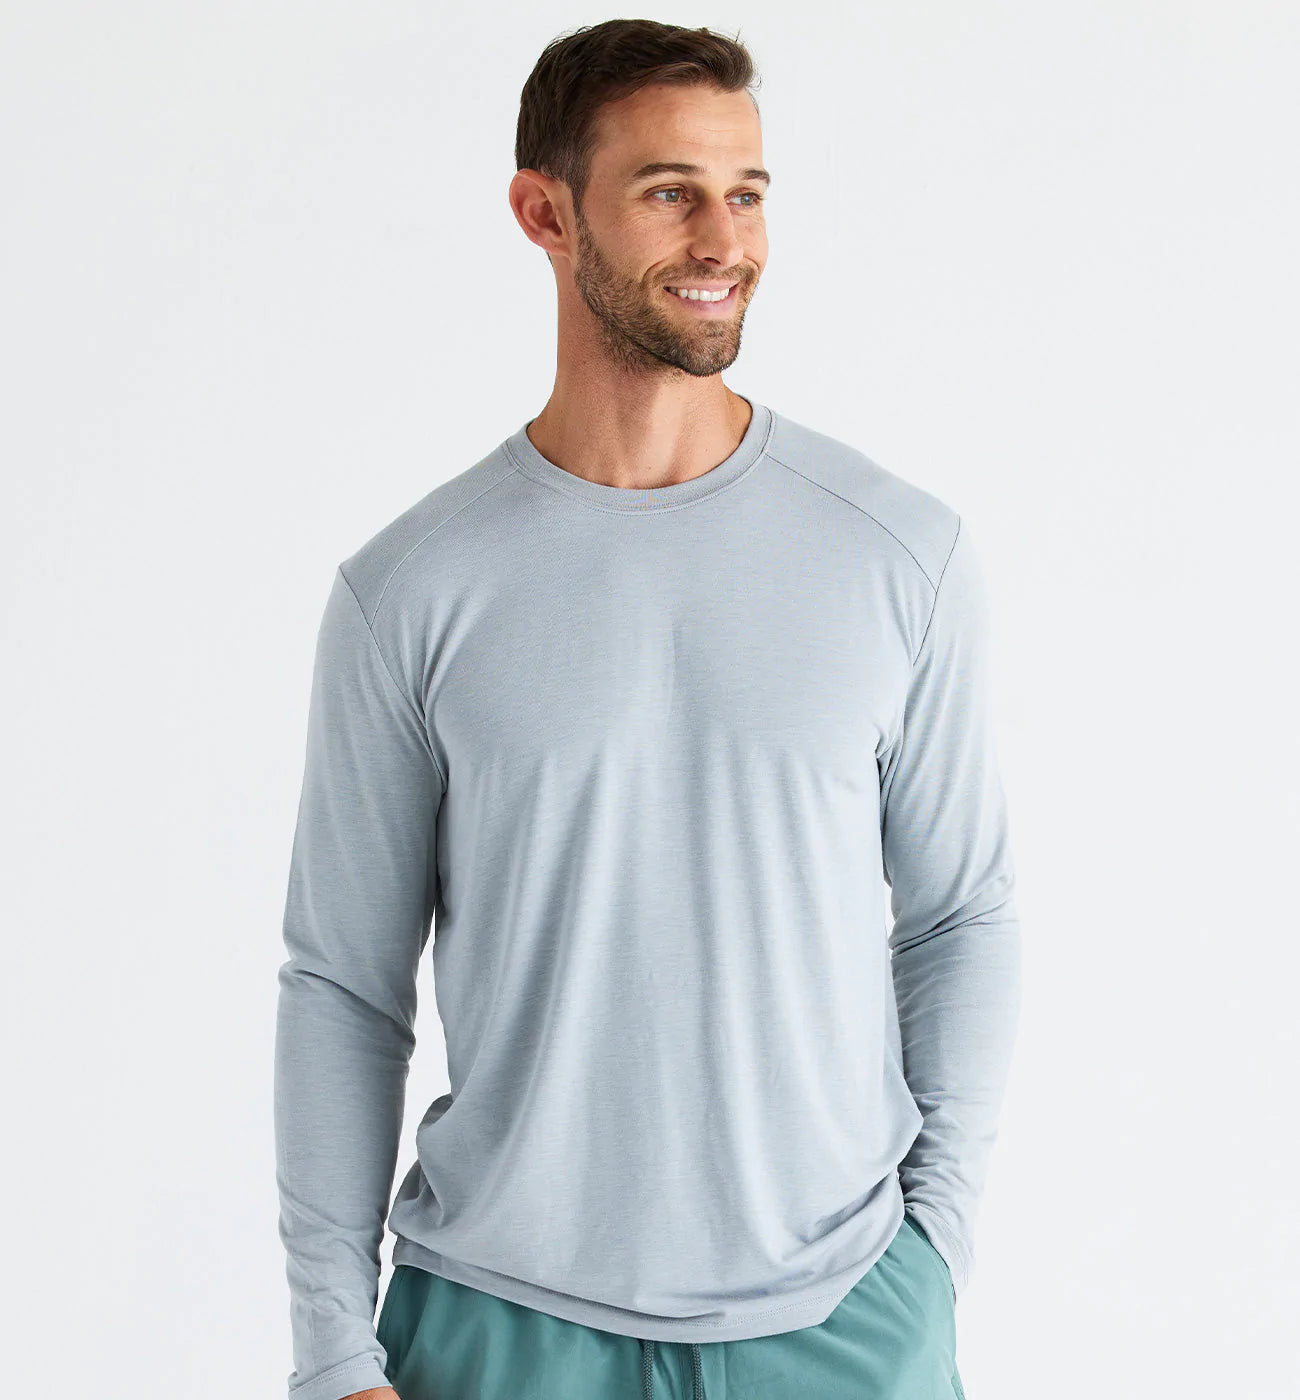 This Lululemon long-sleeve top is a 'favourite go-to' — and it's only $54